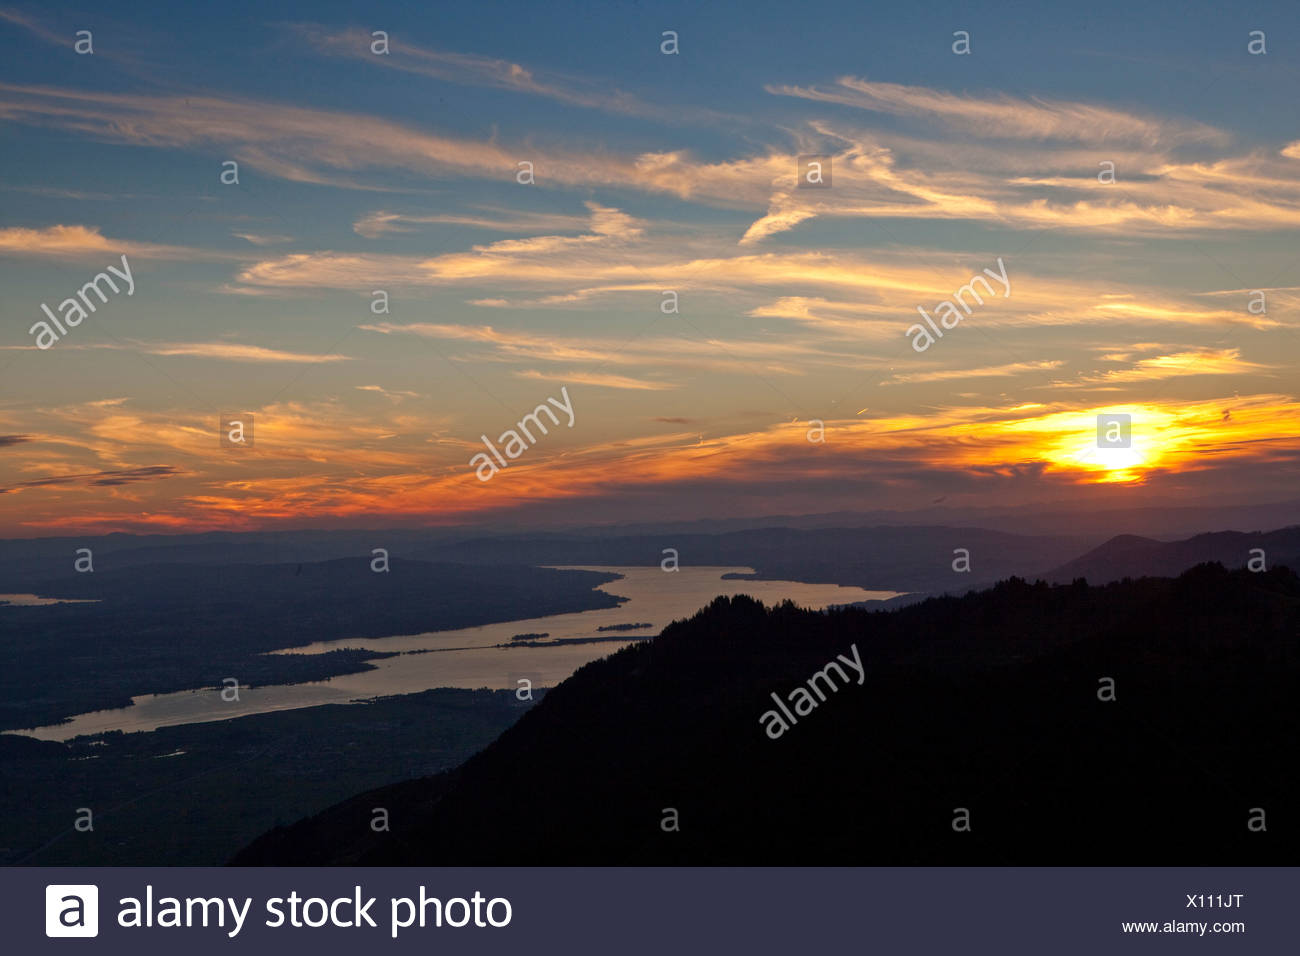 Sunset Pictures Of Mountains And Lakes